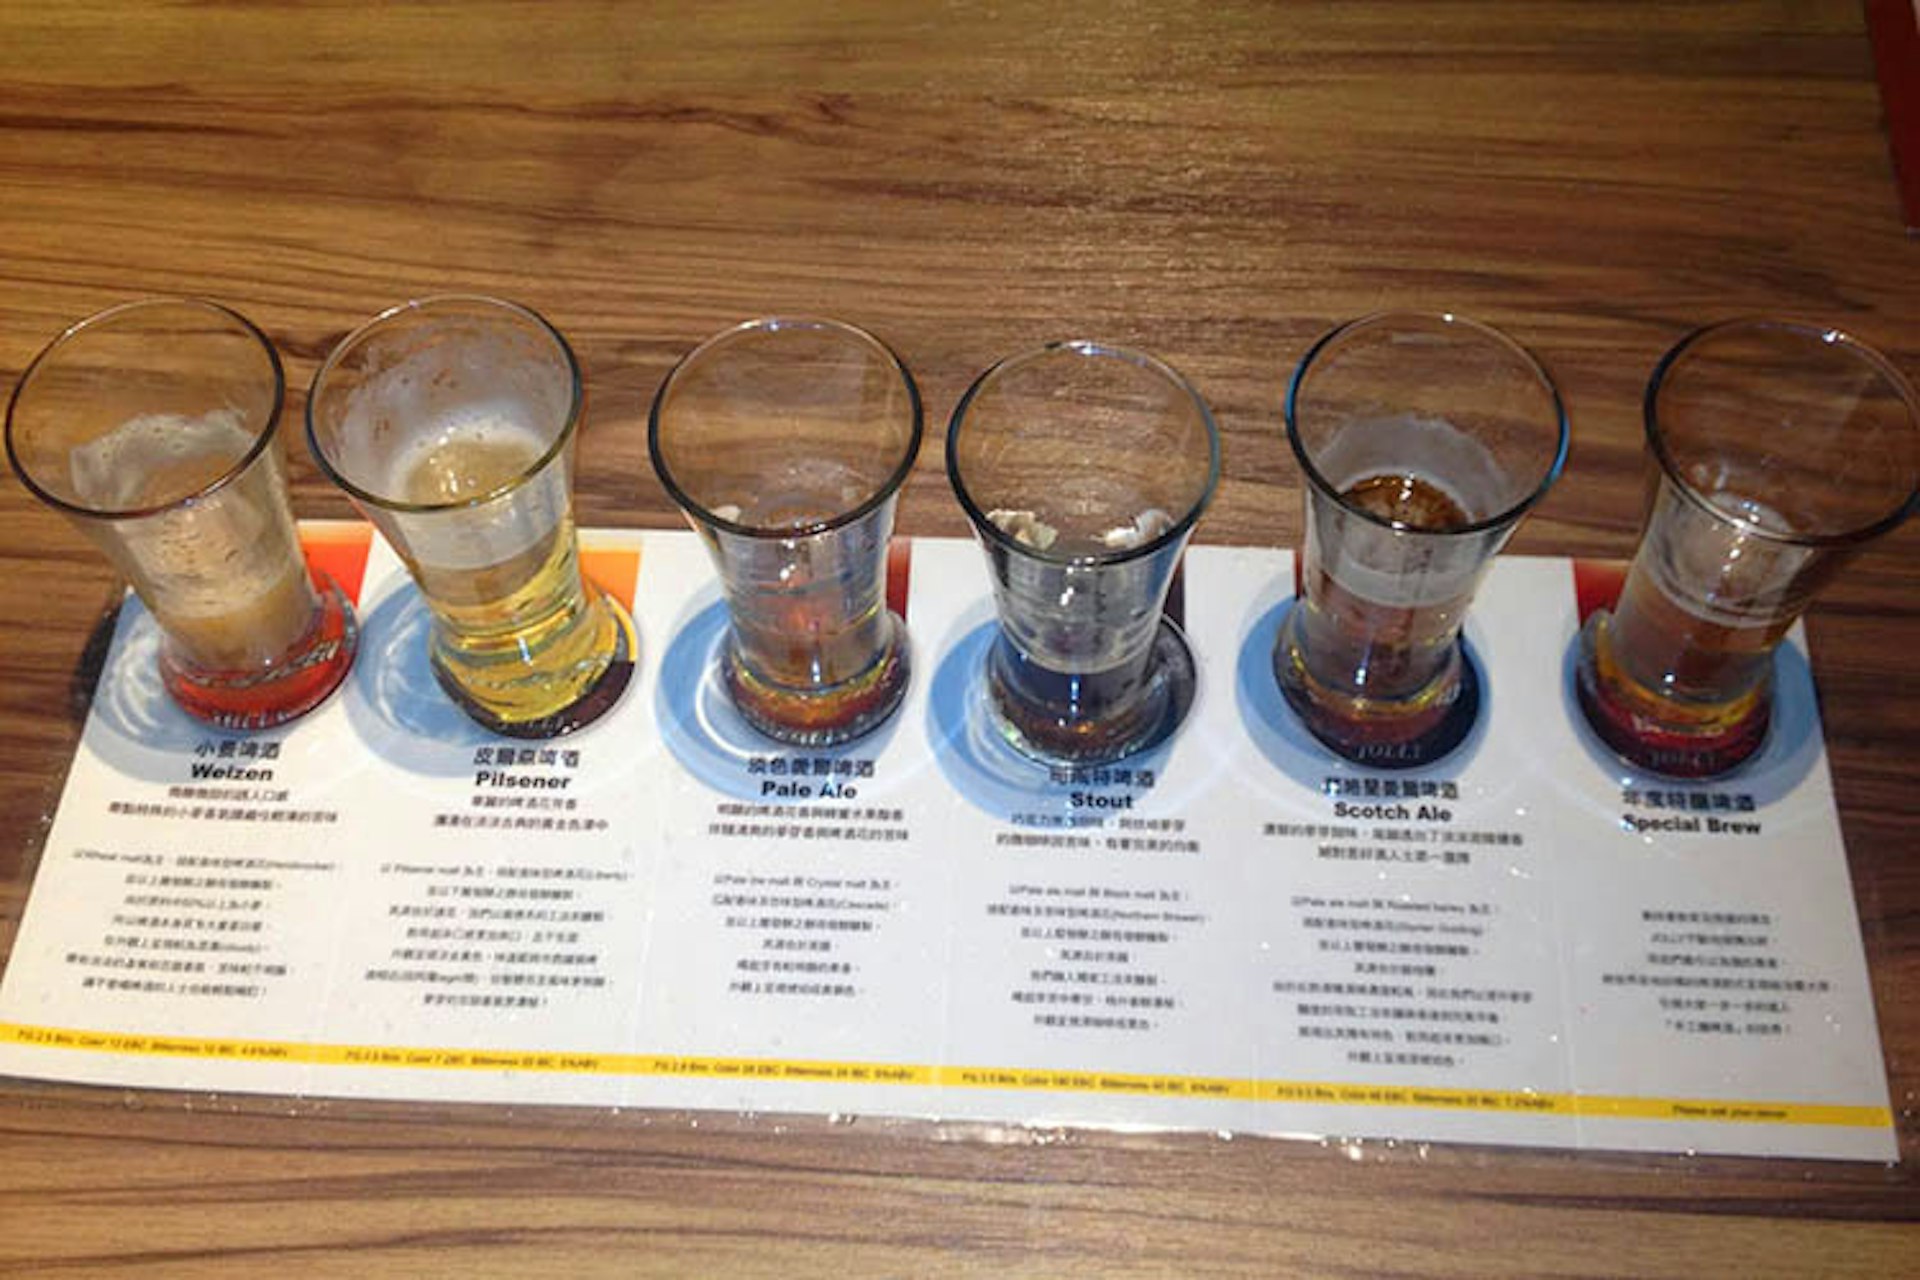 Sampler flight at Jolly. Image by Megan Eaves / Lonely Planet